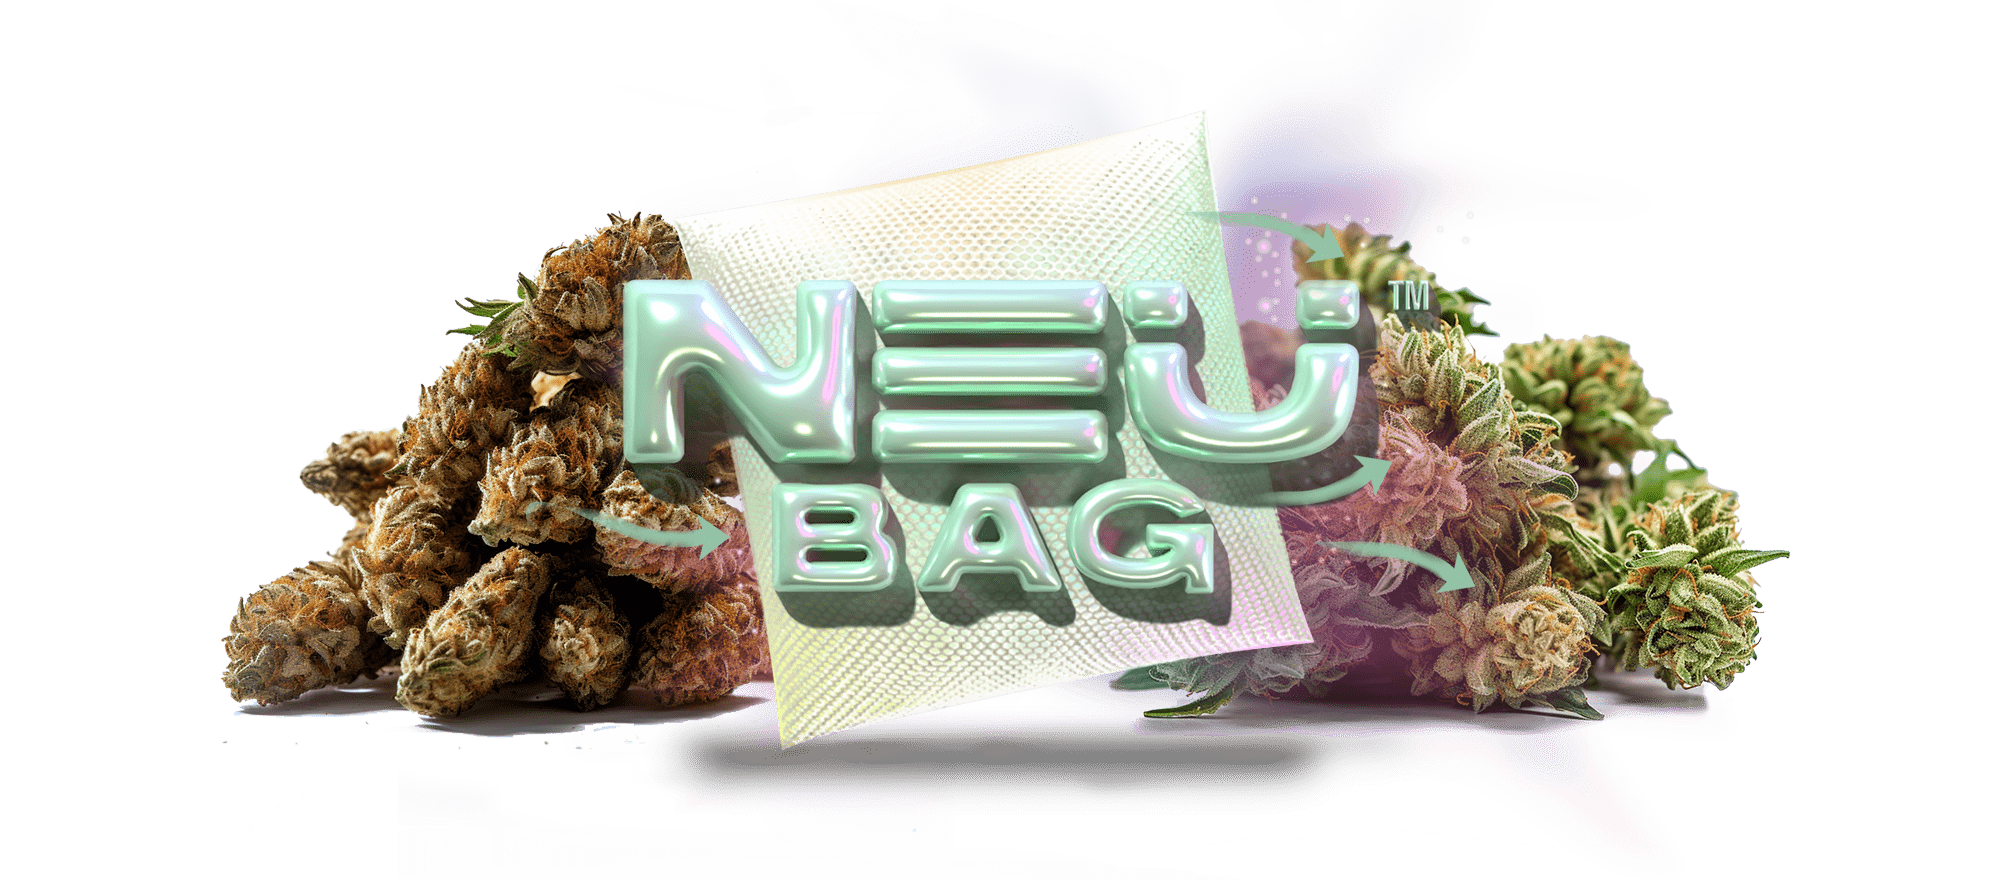 flower enriched by neu bags with bag and logo